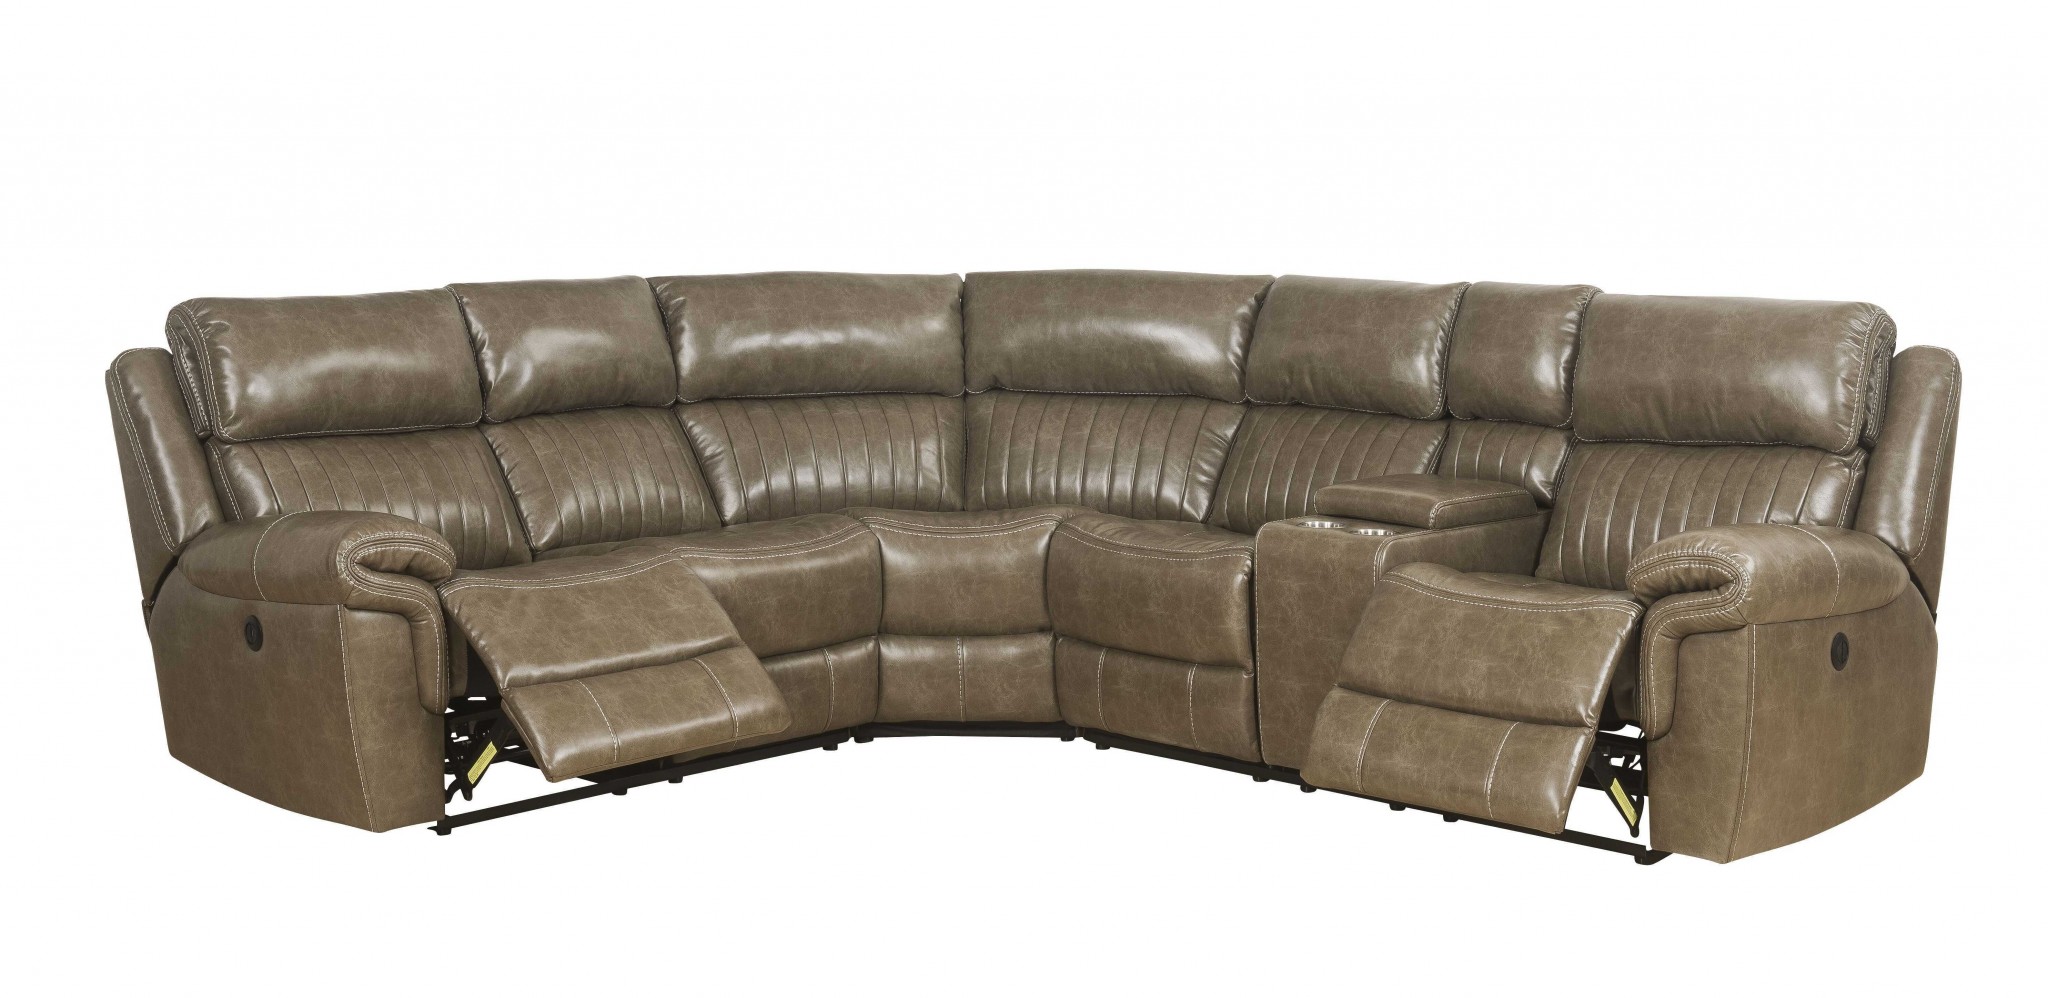 88" X 101" X 41" Taupe Leather-Gel Upholstery Metal Reclining Mechanism Sectional Sofa (Power Motion)